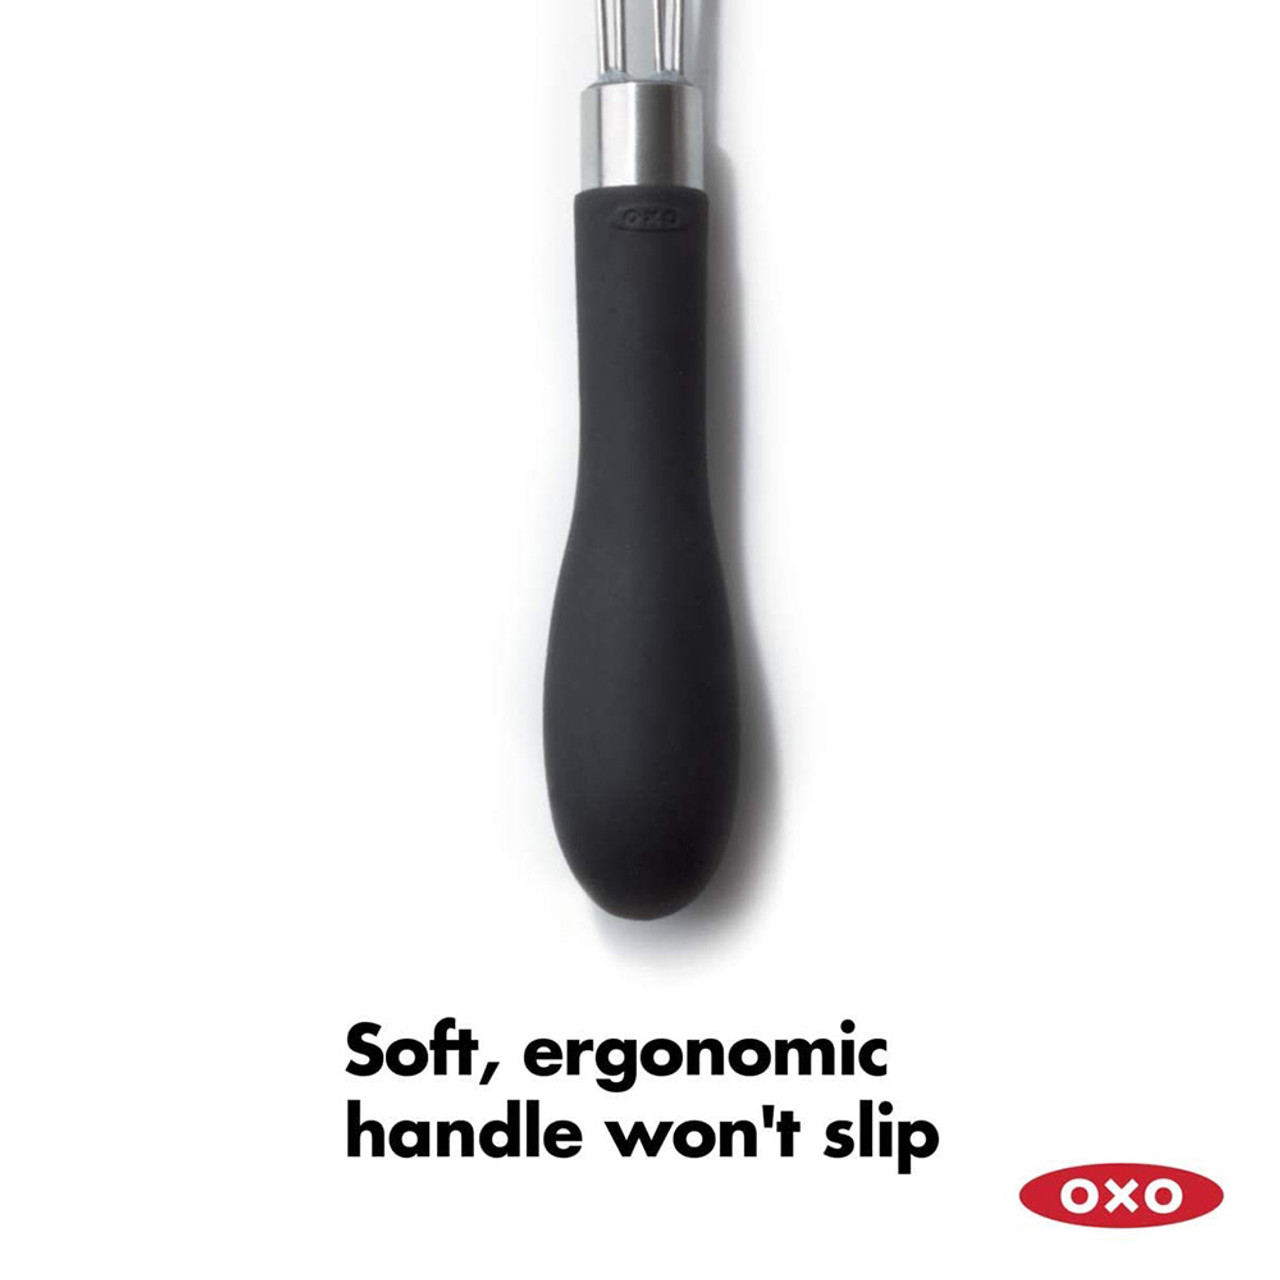 https://cdn11.bigcommerce.com/s-hccytny0od/images/stencil/1280x1280/products/4001/14663/oxo-good-grips-flat-whisk-3__87595.1618141238.jpg?c=2?imbypass=on